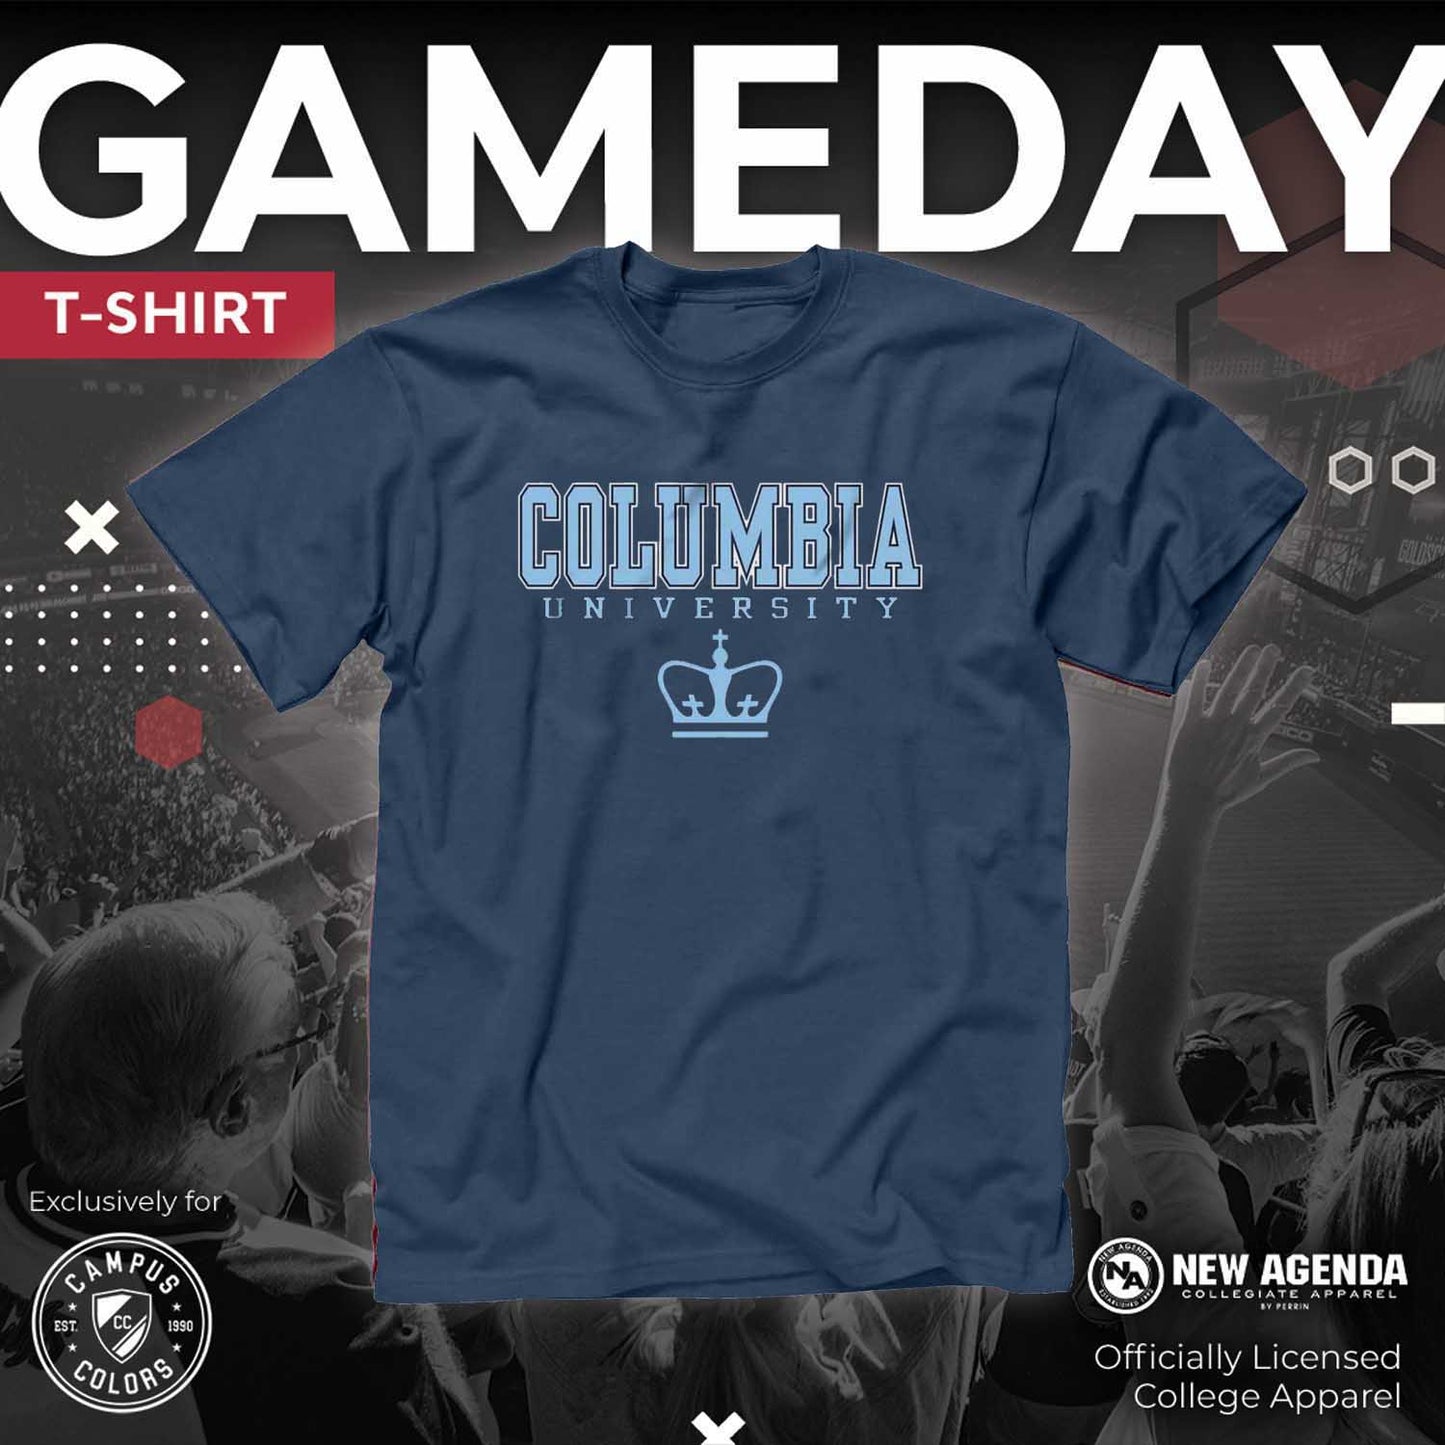 Columbia Lions NCAA Adult Gameday Cotton T-Shirt - Navy